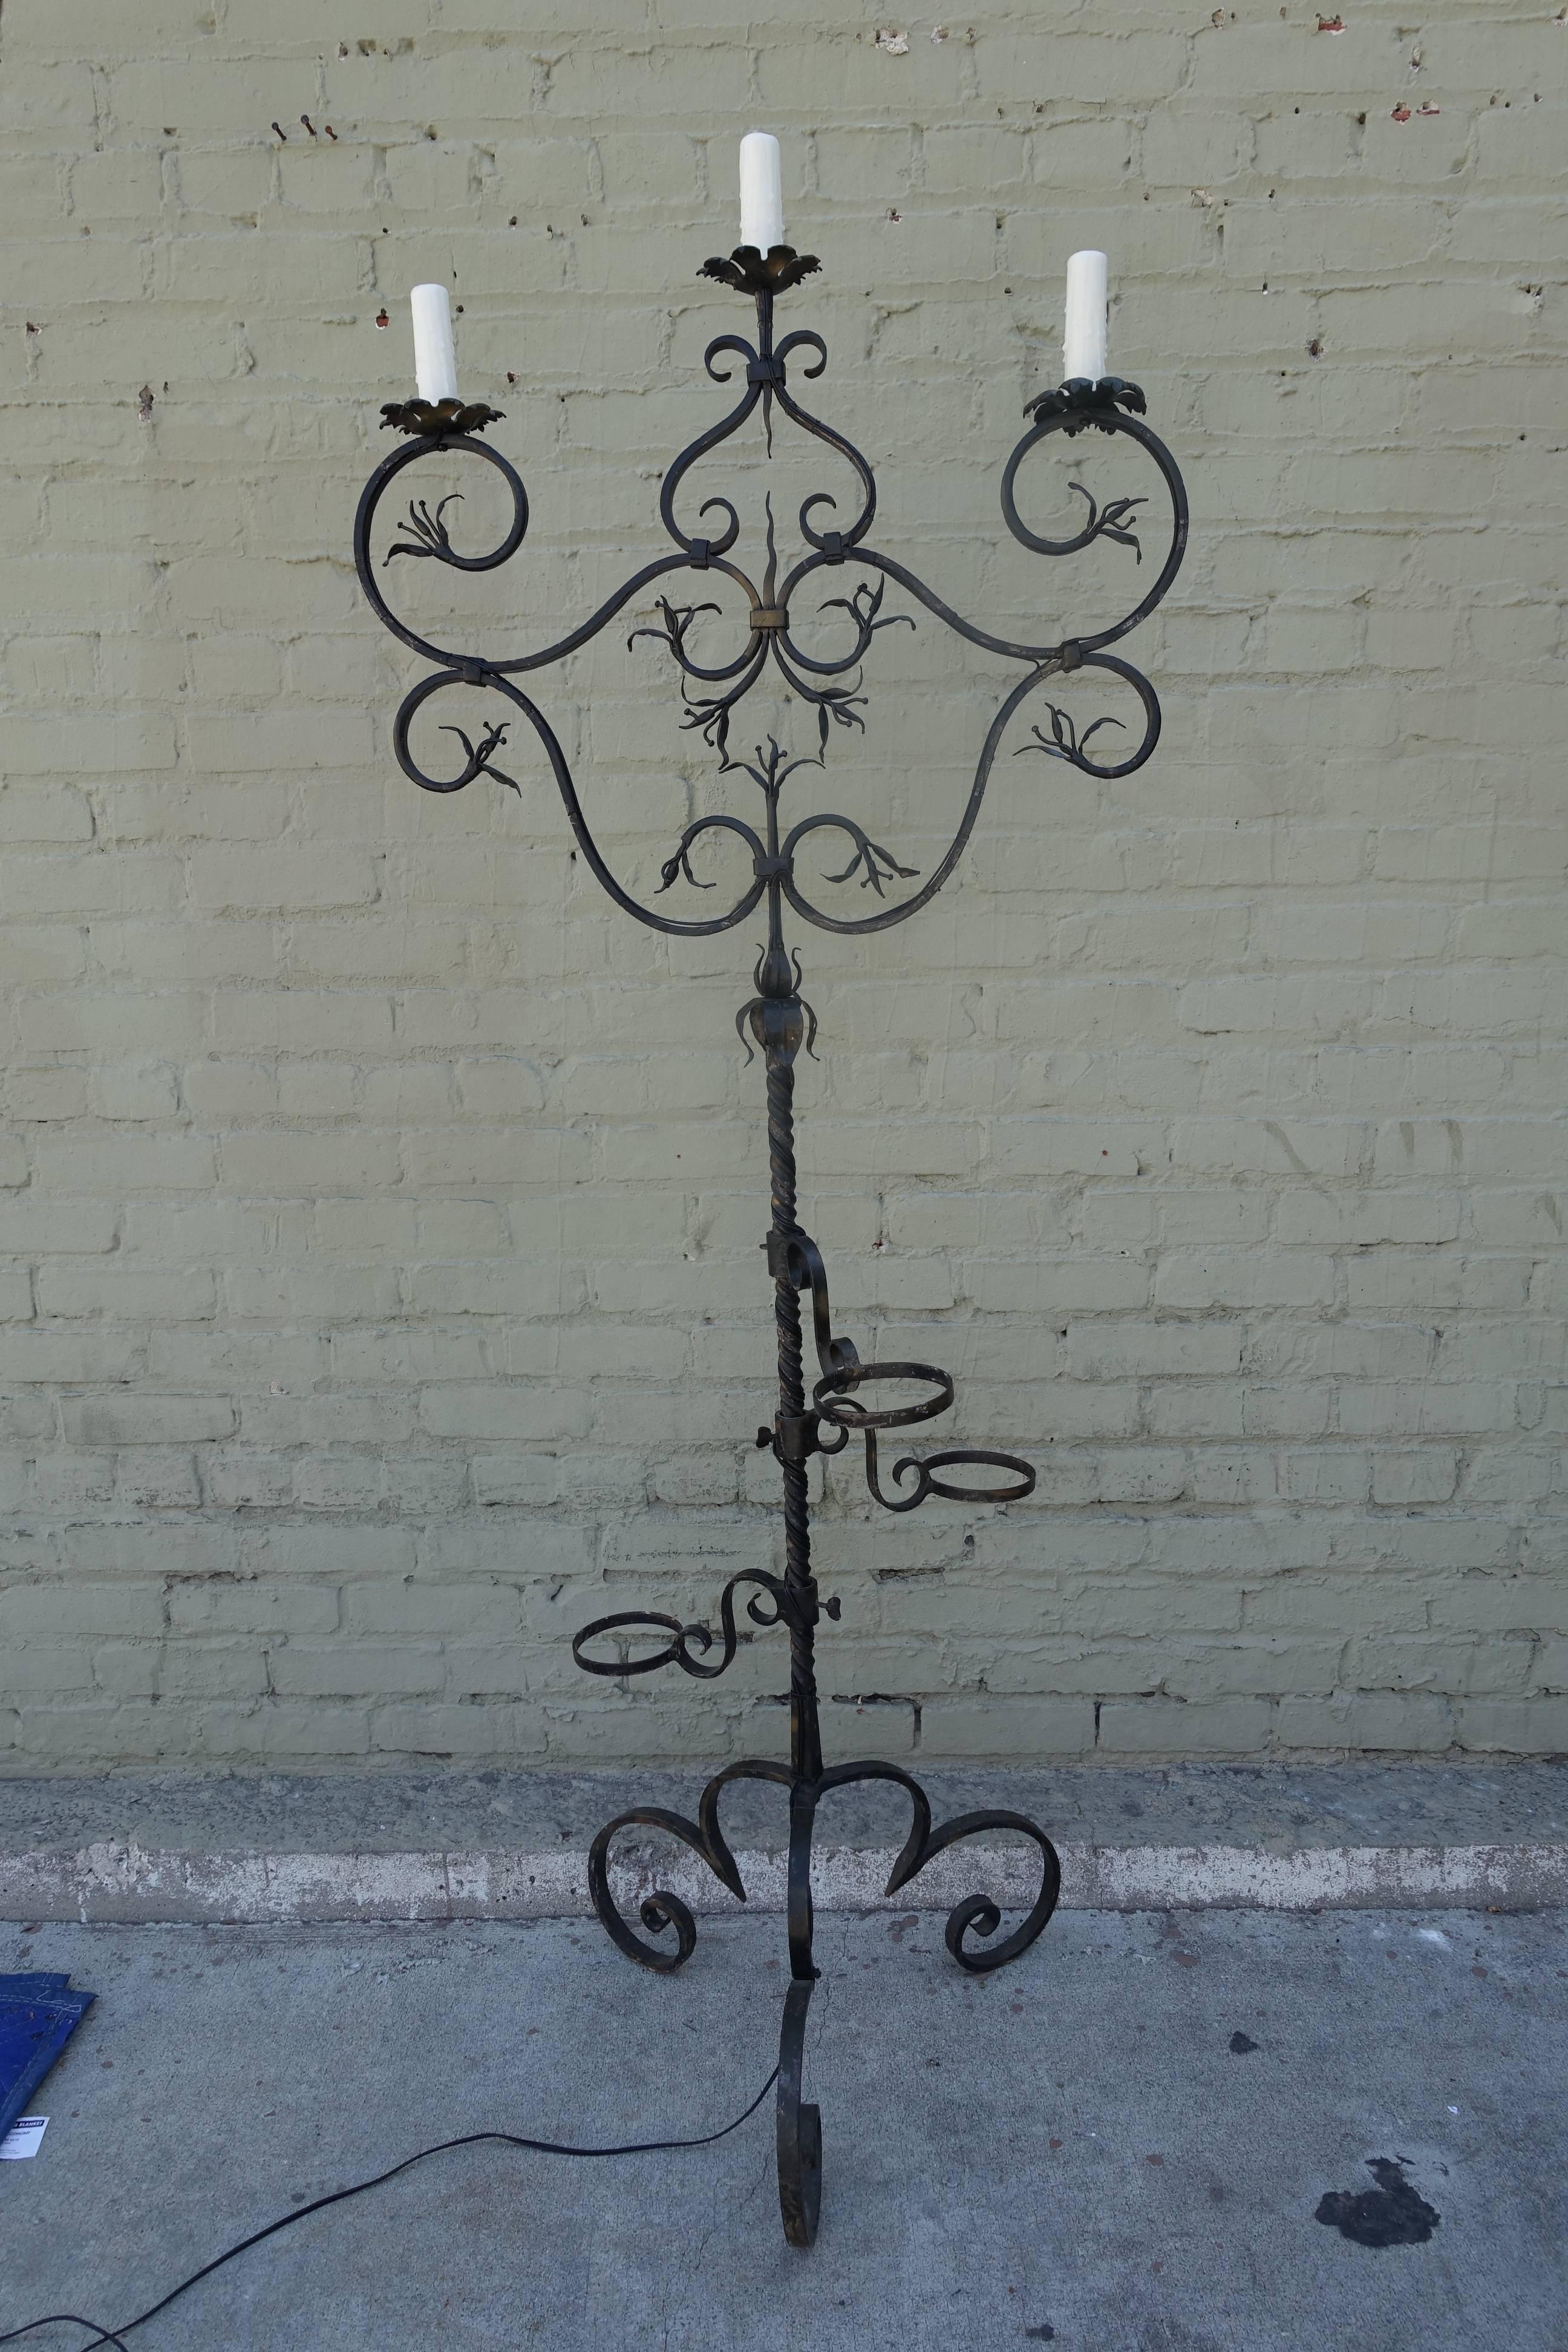 Spanish three-light wrought iron candelabra lamp that has been newly wired with drip wax candle covers. There are attachments for plants/candles/whatever. Beautiful forged iron detail throughout. Stands on a tripod scrolled base.